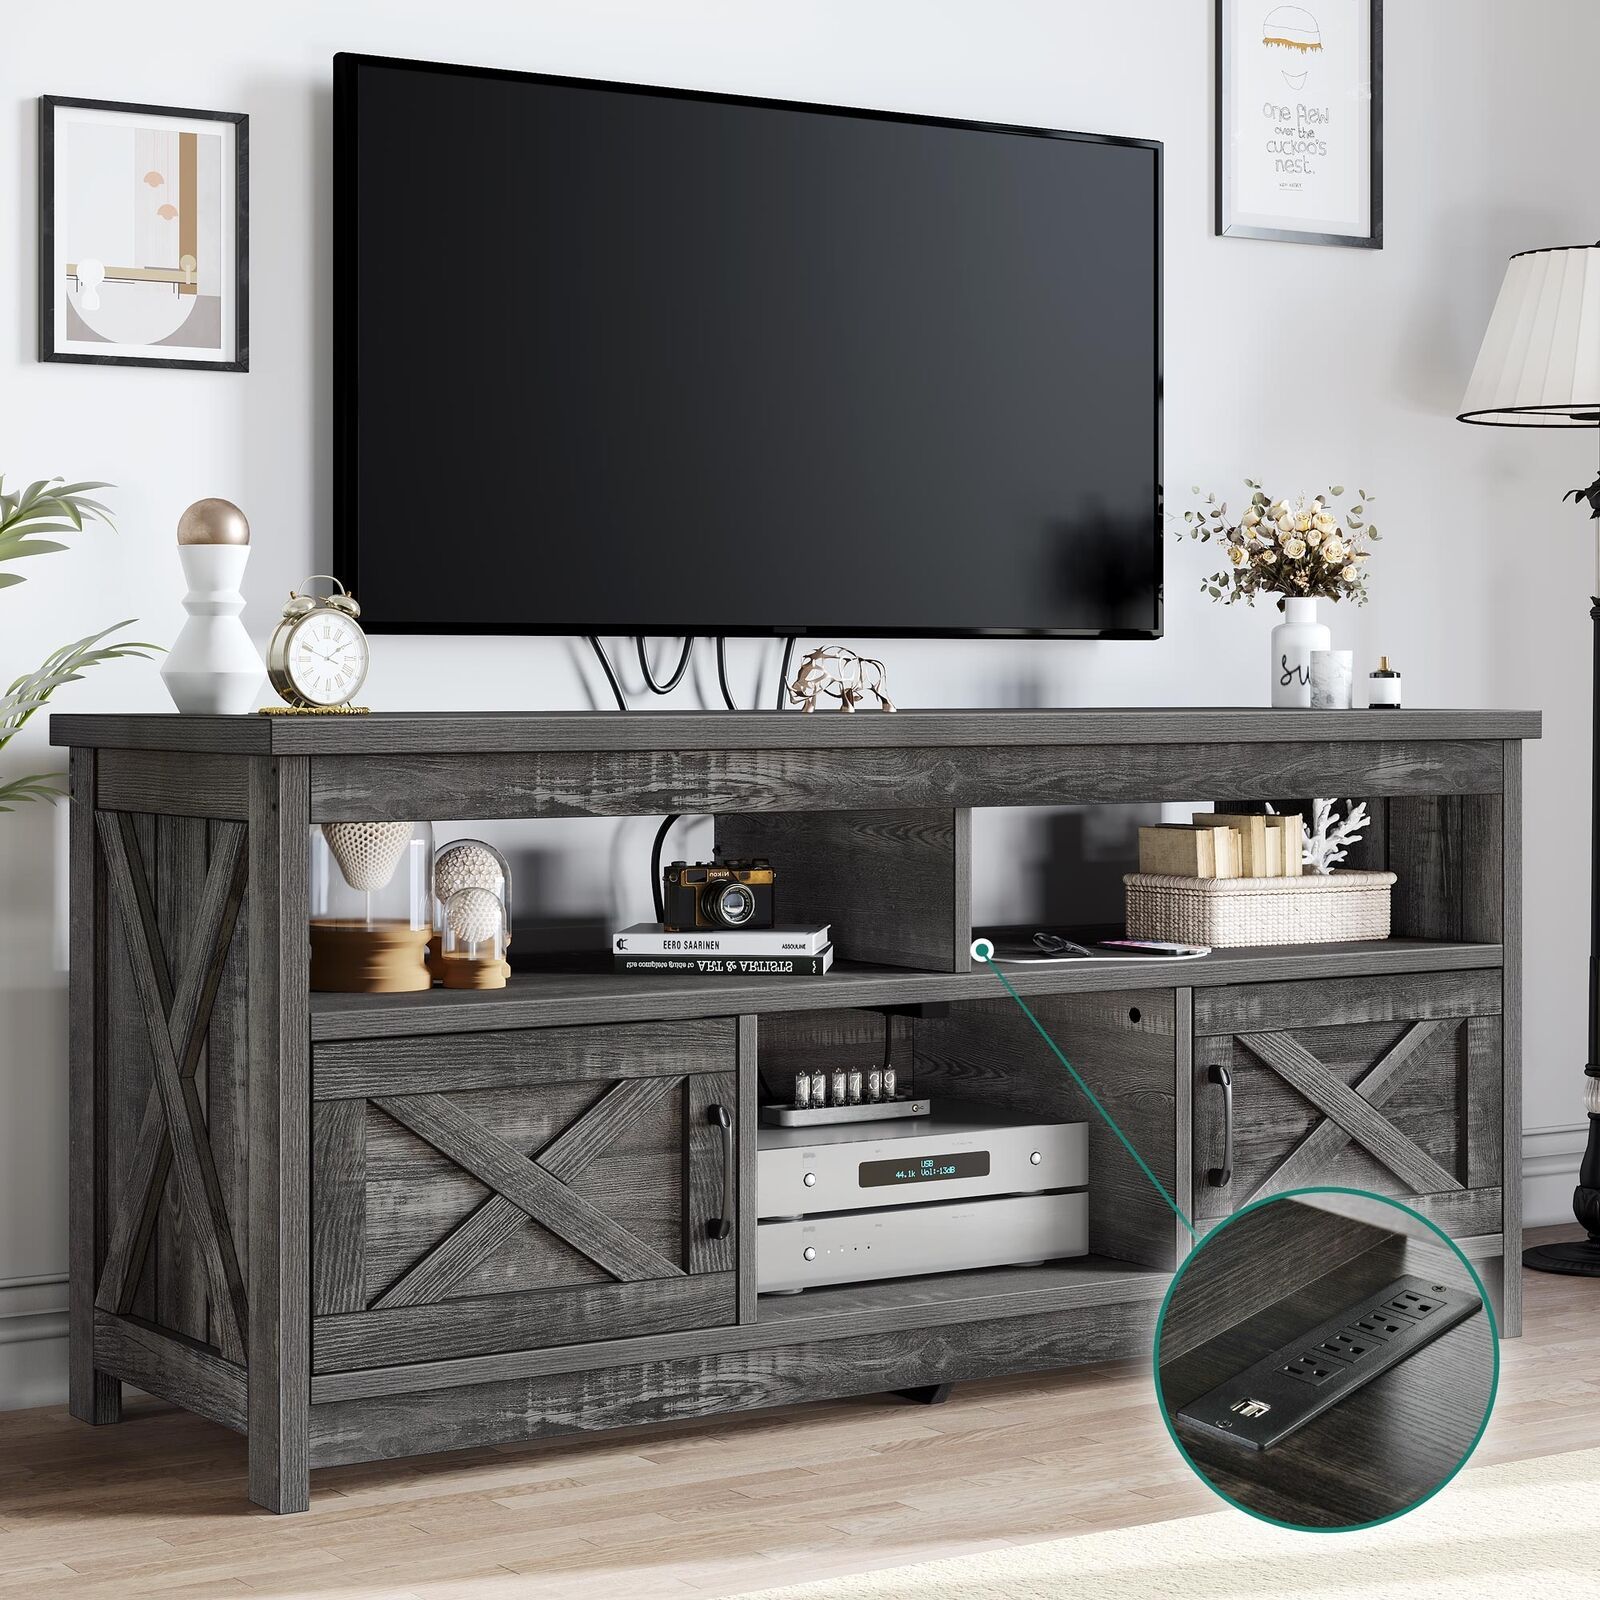 Farmhouse Tv Stand For 65 In With Power Outlet Media Console W/ Storage  Cabinet | Ebay Within Farmhouse Stands With Shelves (Photo 10 of 15)